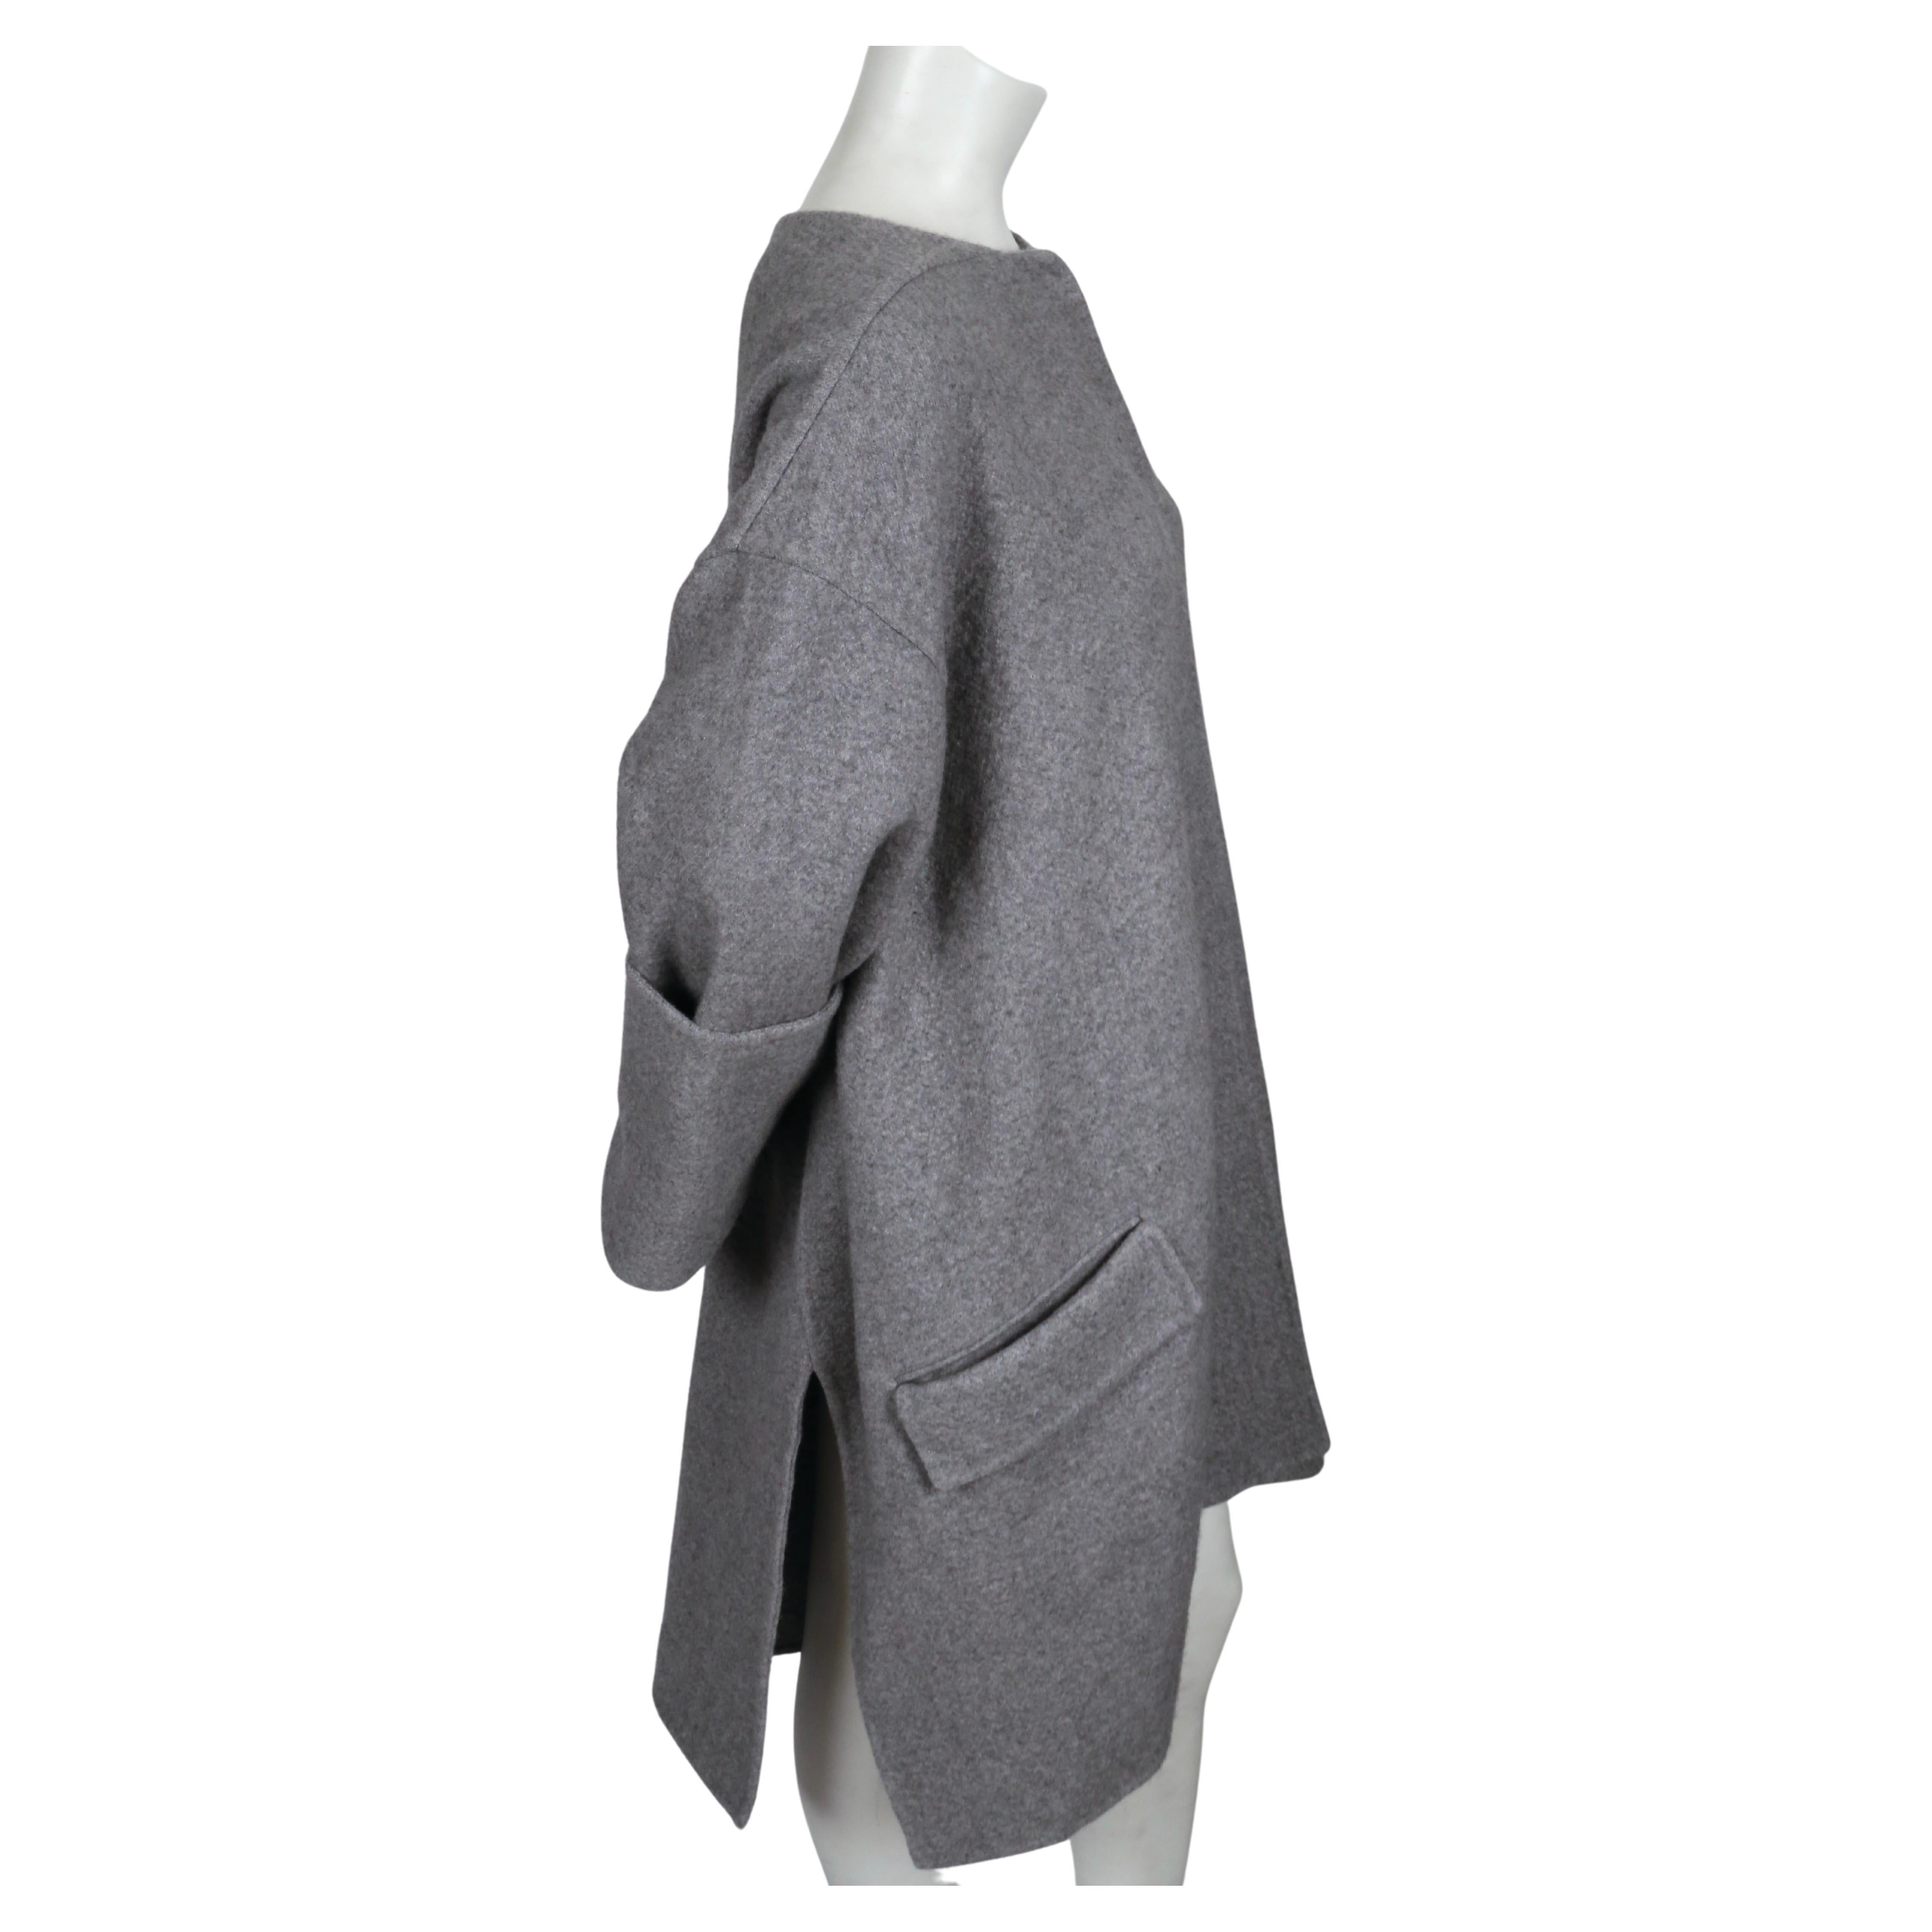 2013 CELINE by PHOEBE PHILO grey cashmere runway coat with exaggerated sleeves For Sale 2